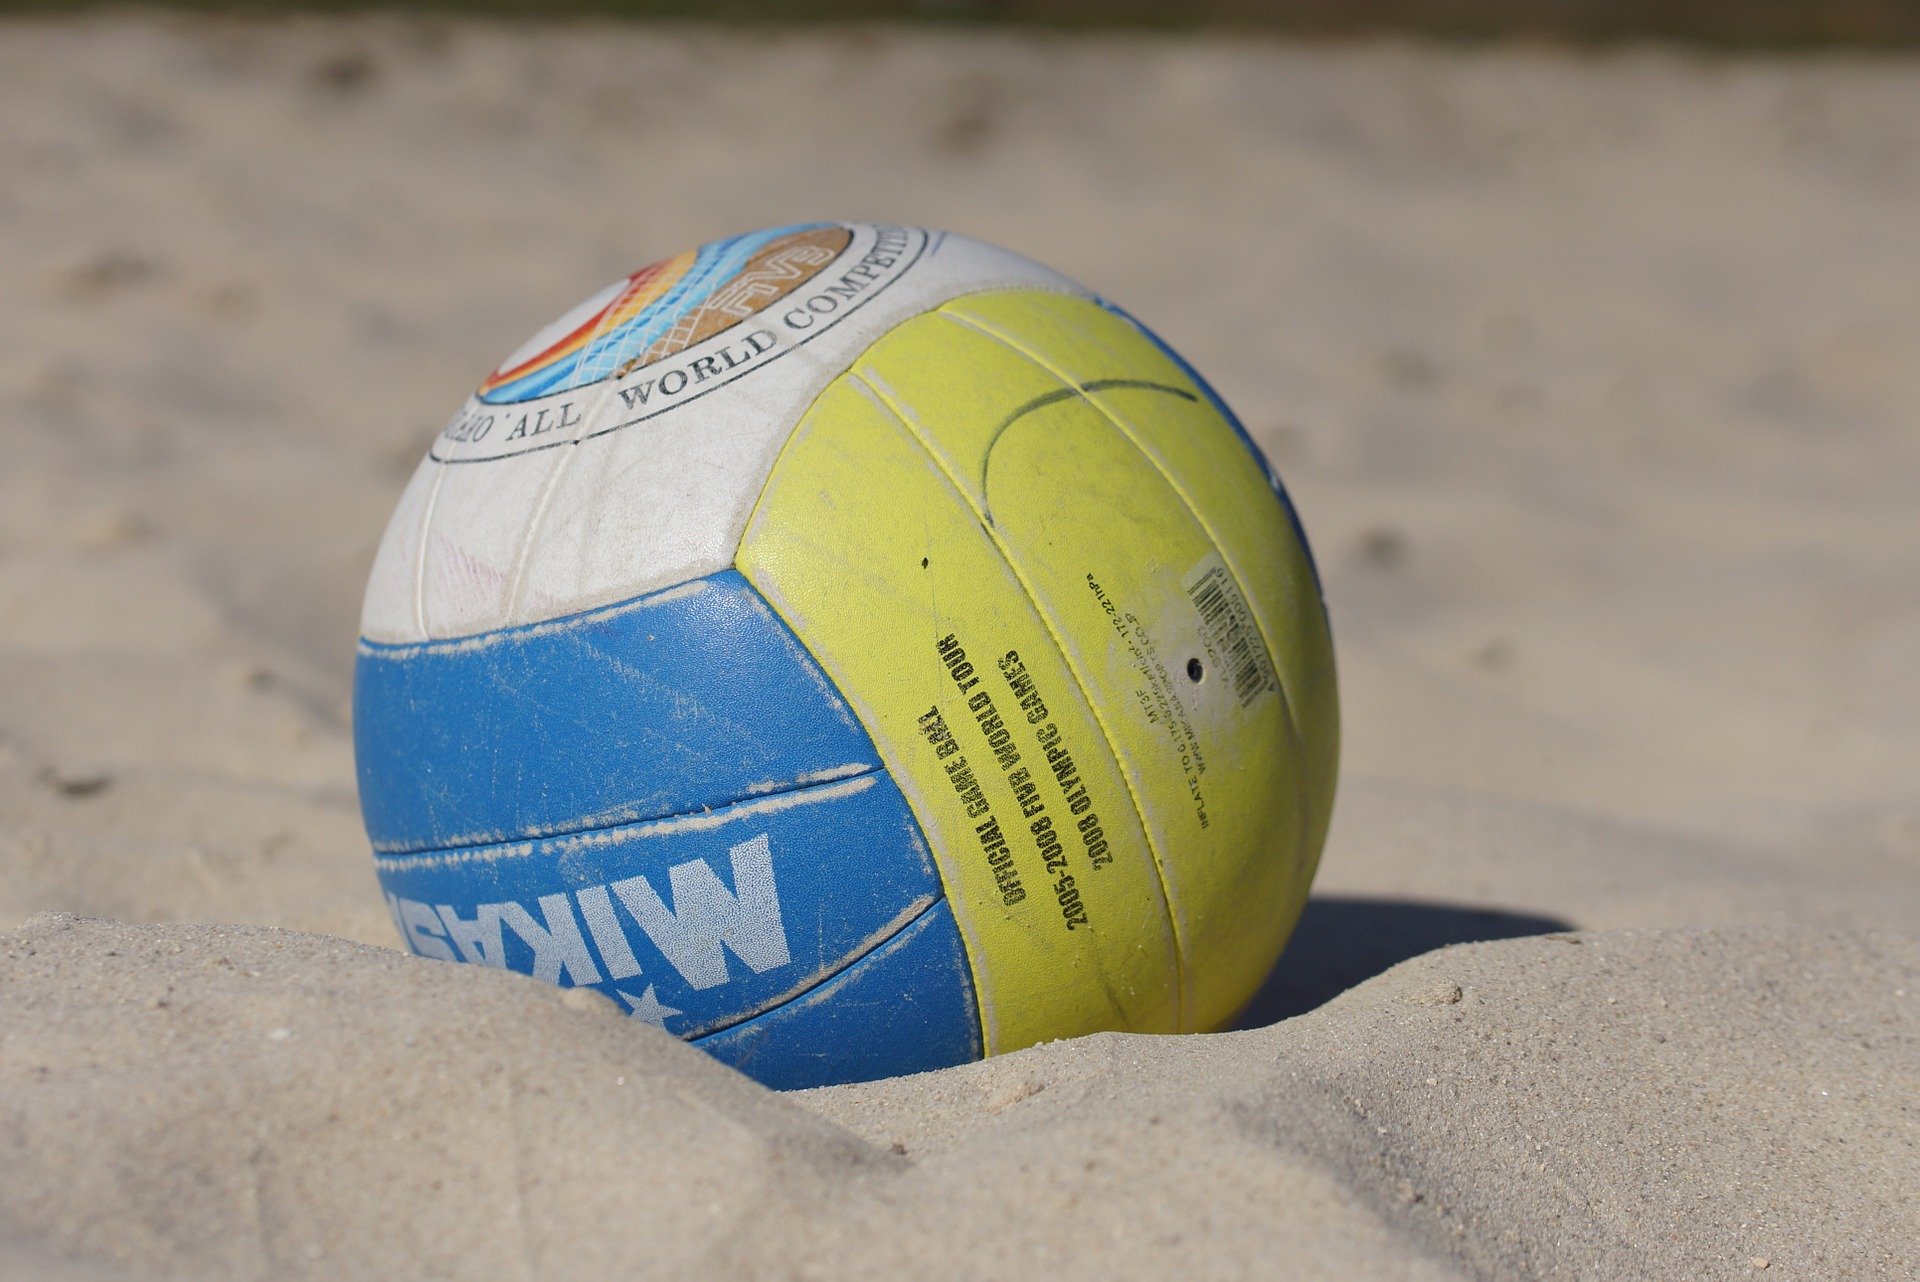 A blue, white, and yellow volleyball lies partially buried in the sand